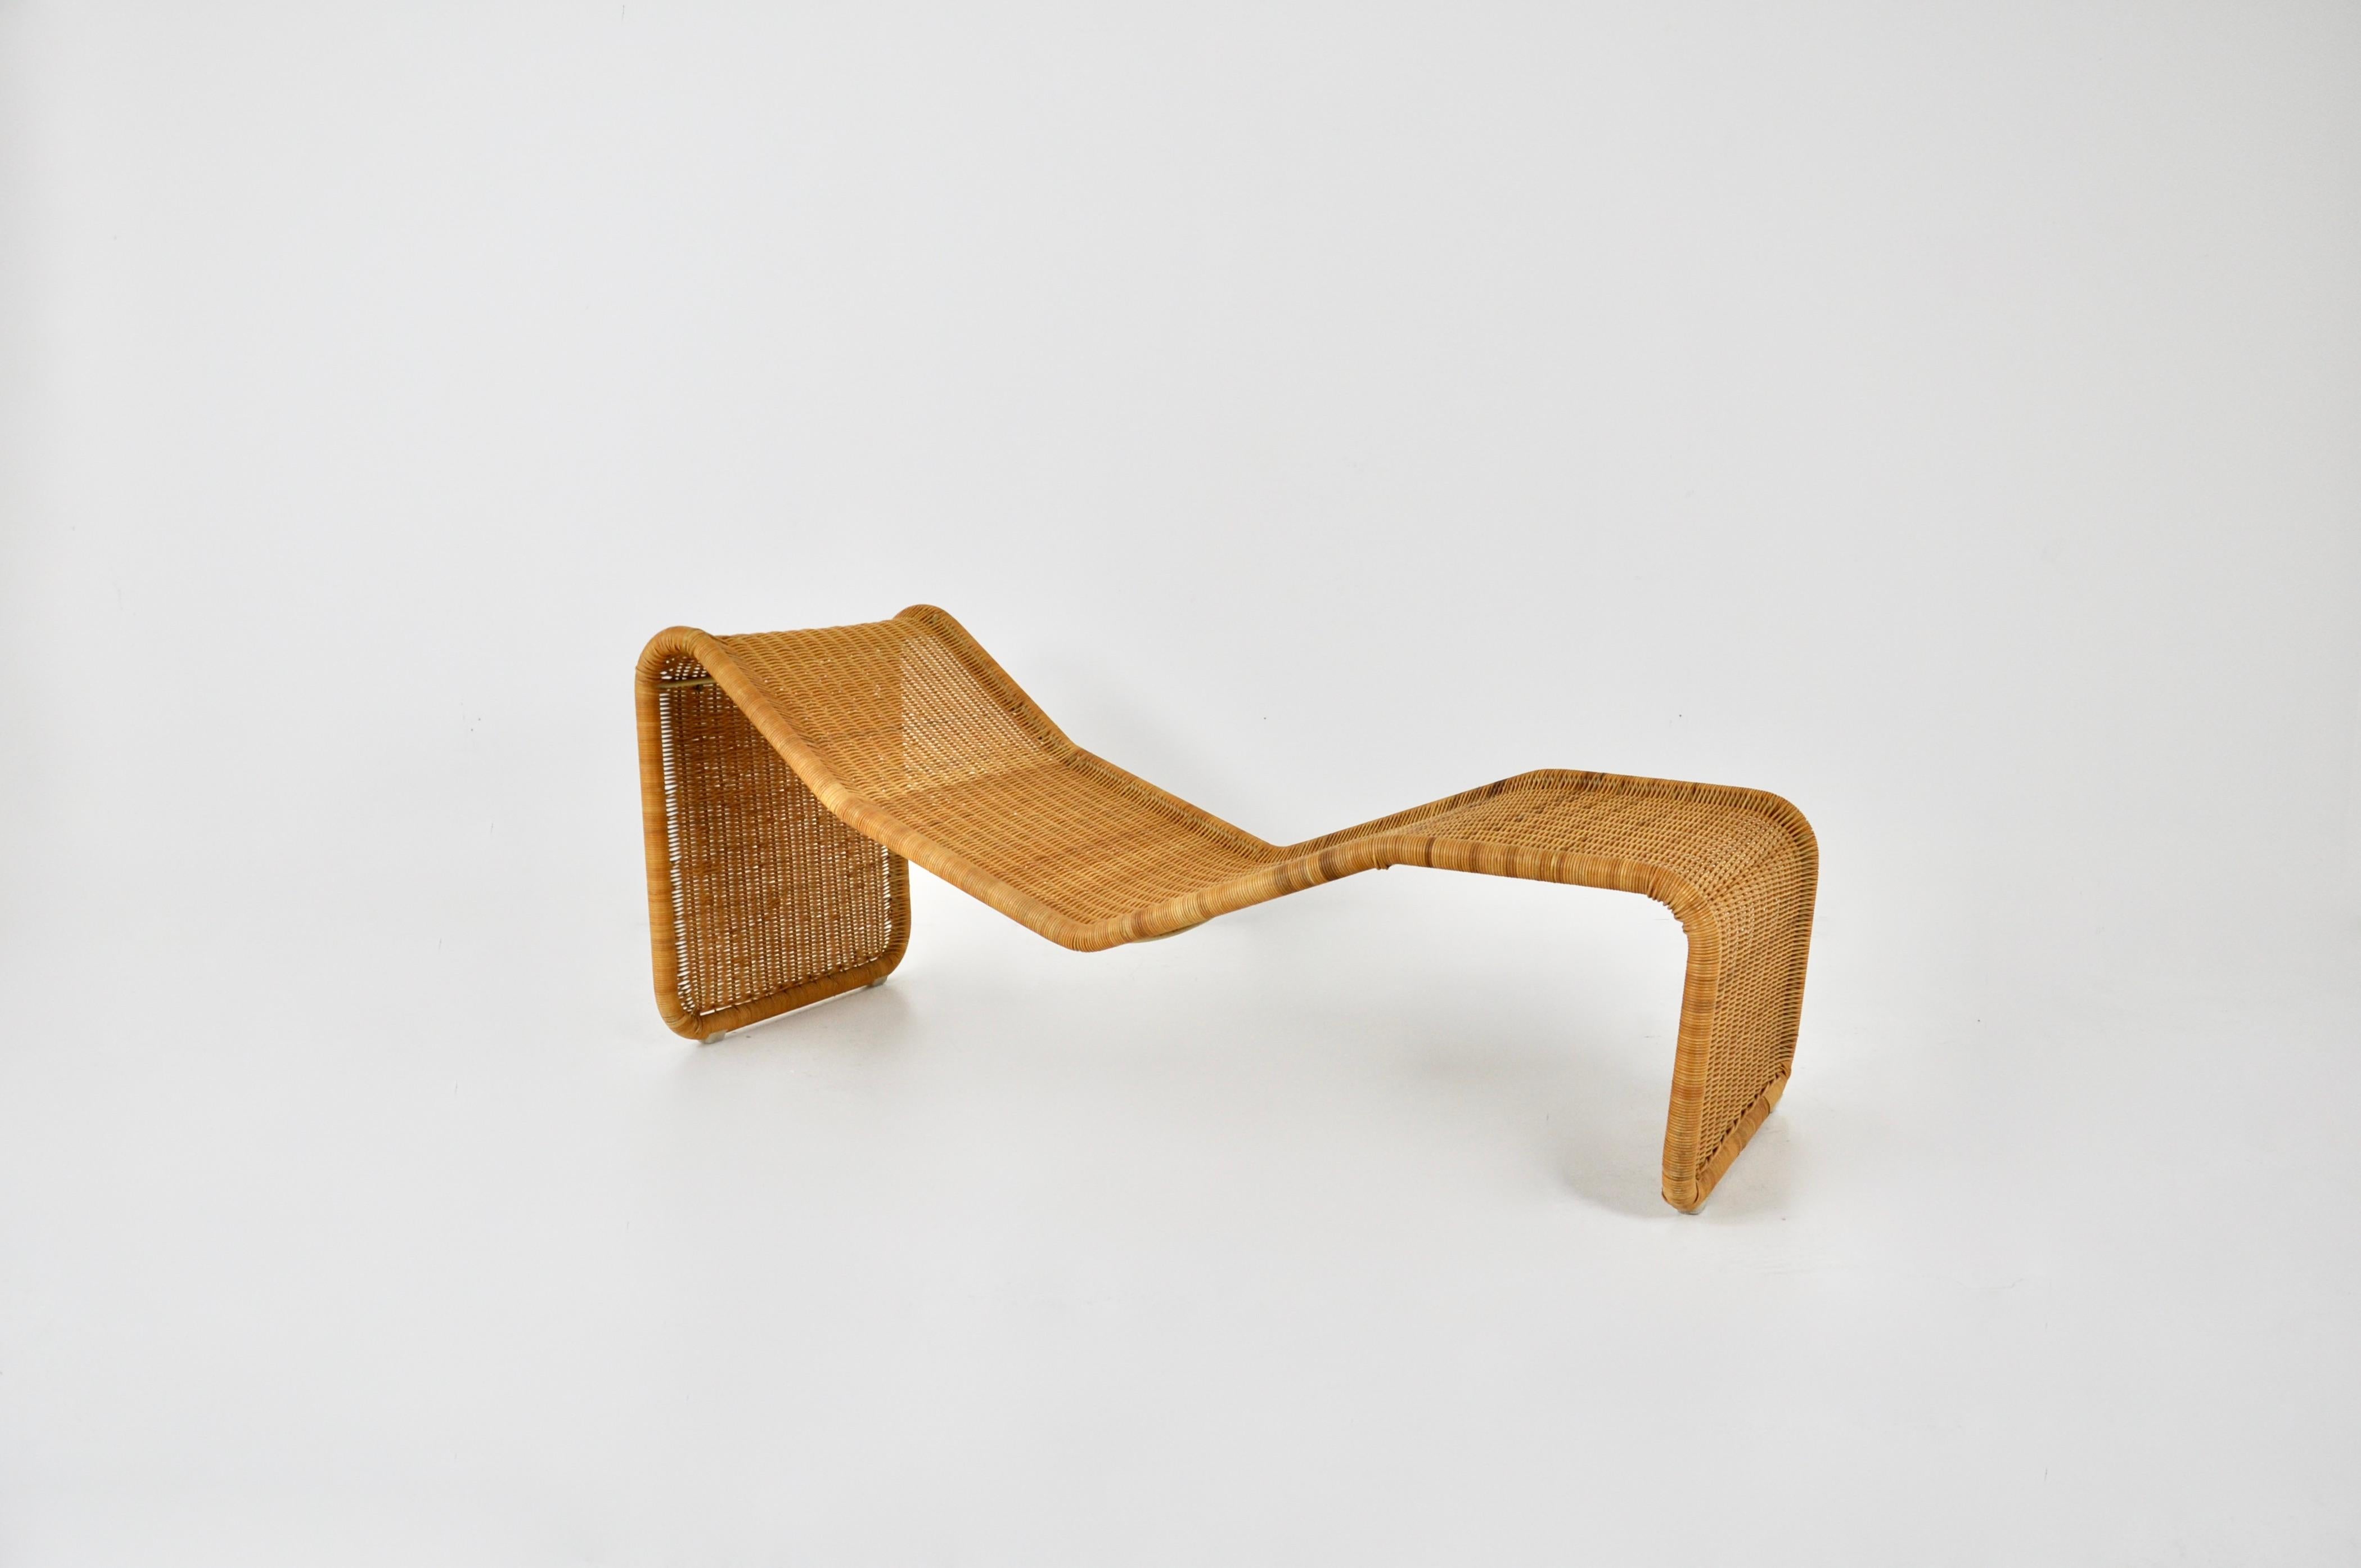 Rattan lounge chair by Tito Agnoli. Wear due to time and age.